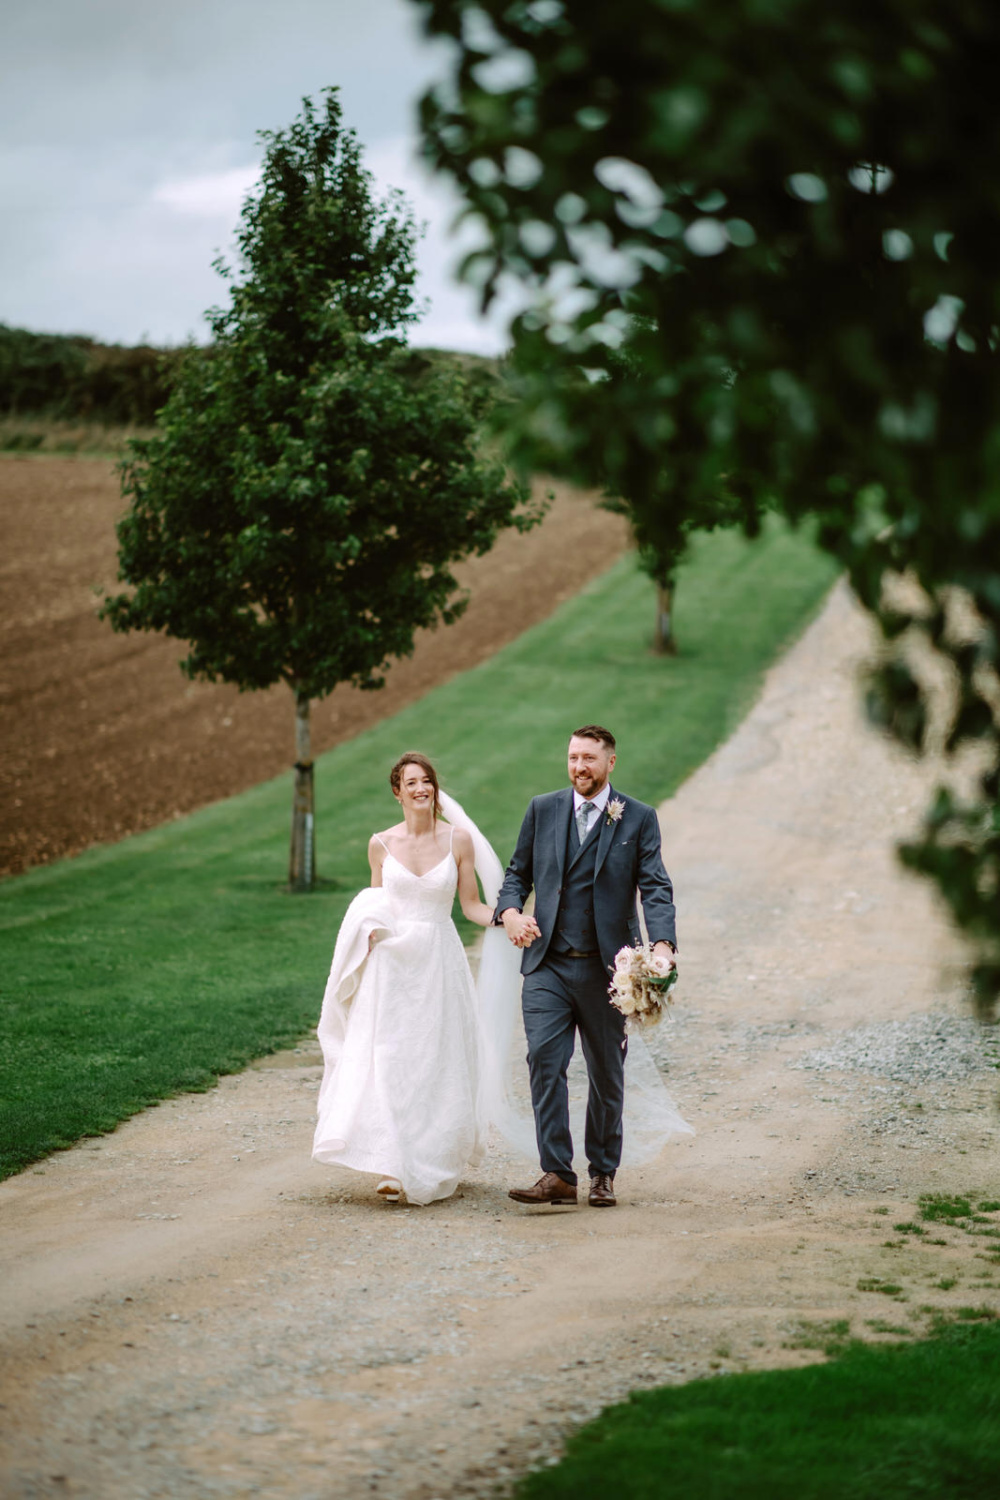 A bride and groom walking down the countryside road.